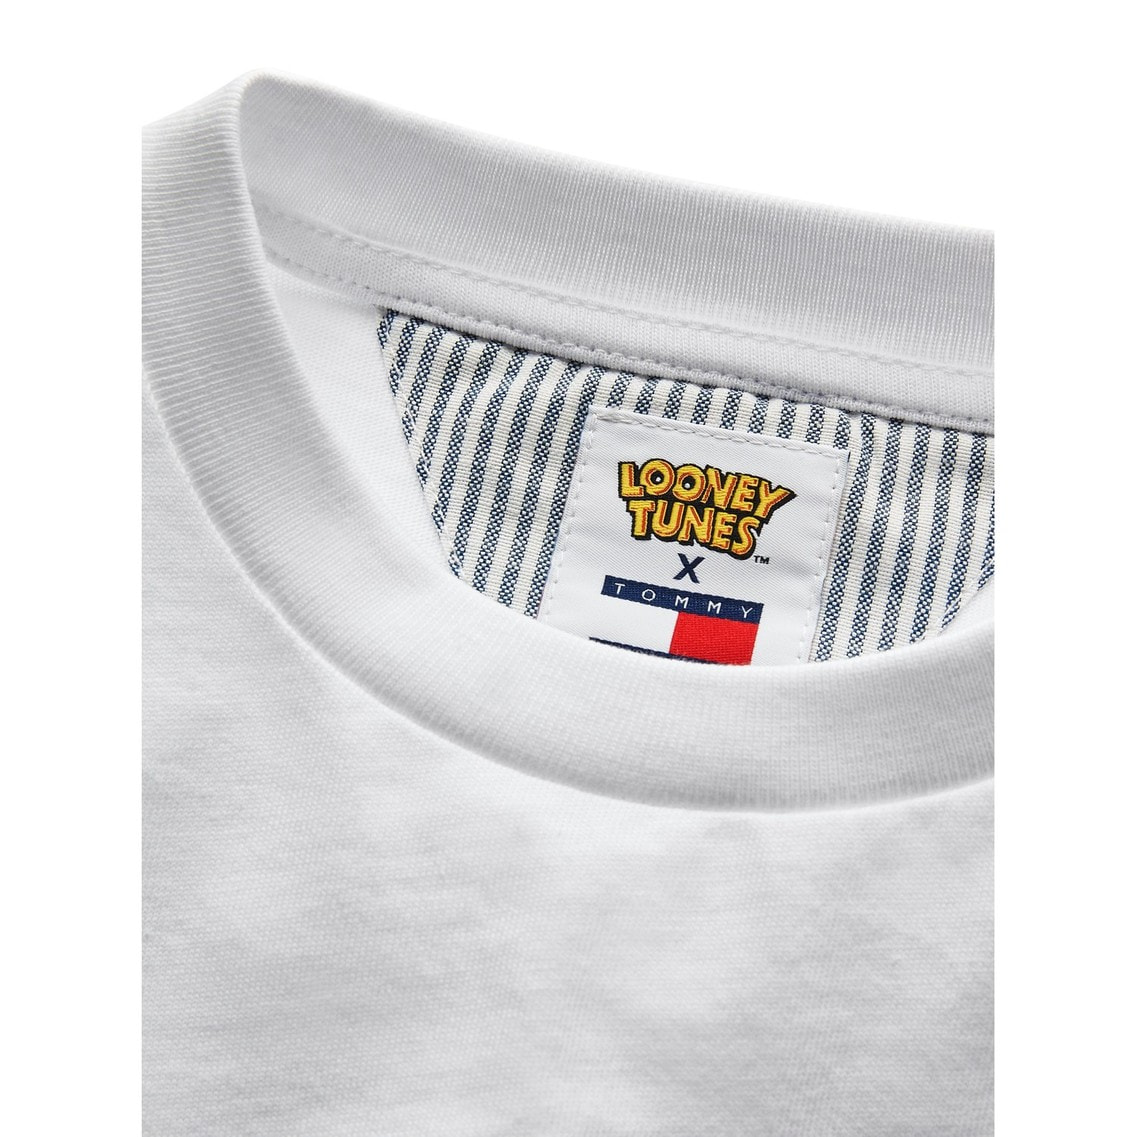 Tommy Jeans Looney Tunes T Shirt Tommy Hilfiger Tommy Hilfiger